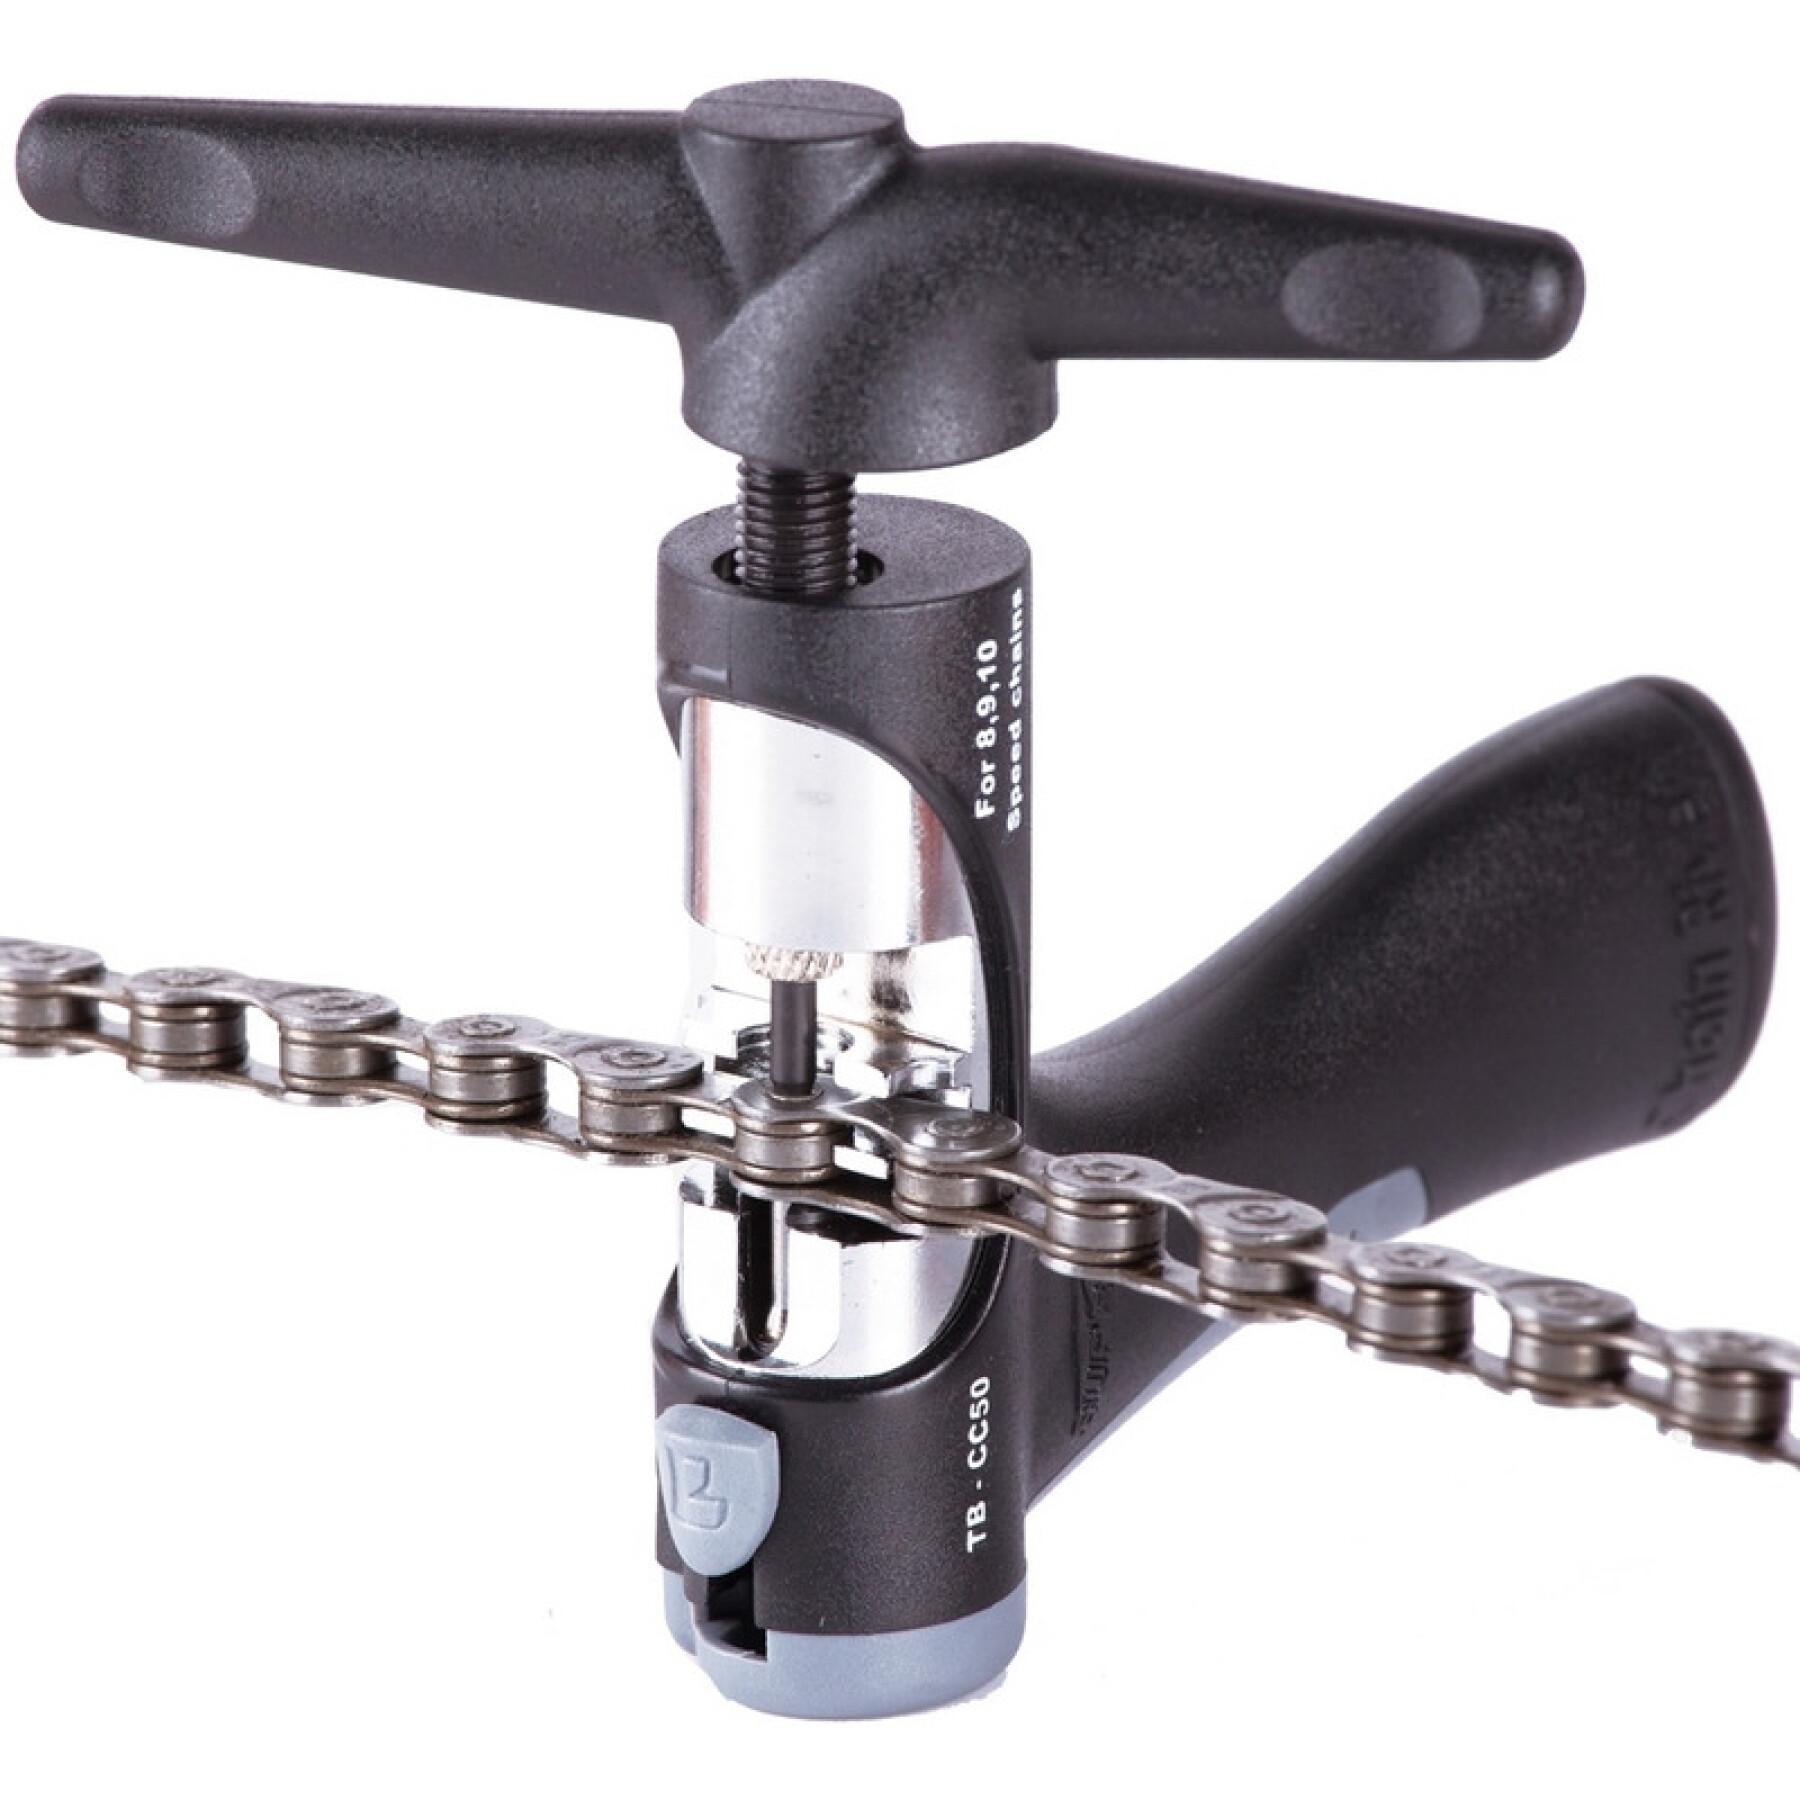 Patented chain shifter for 8/9/10 speed chains Super B